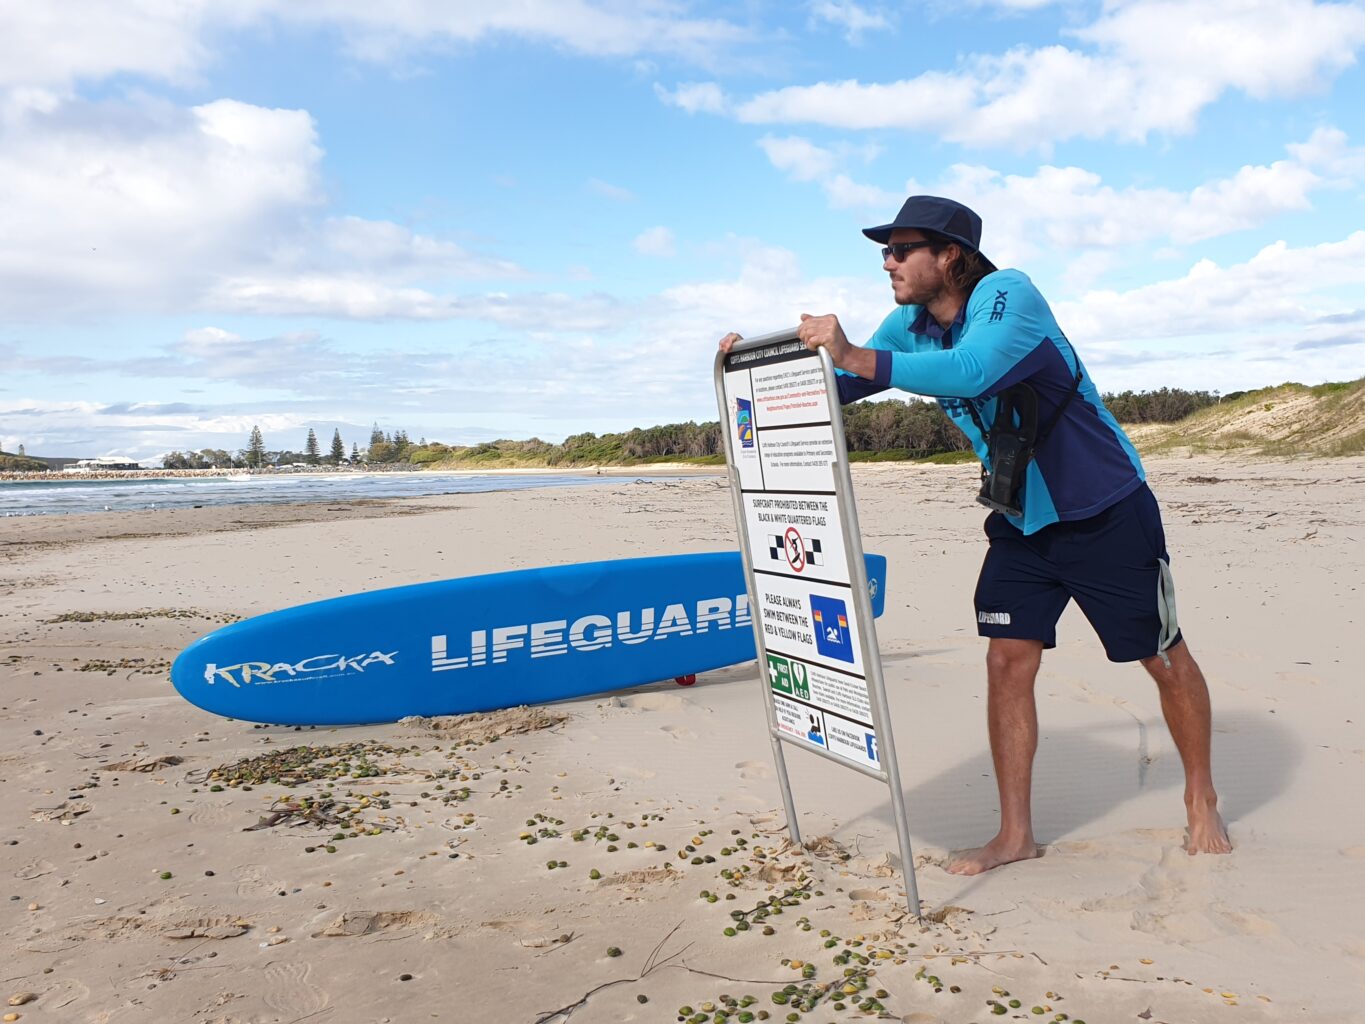 Rescue boards are an essential tool the Lifeguards use in rescues